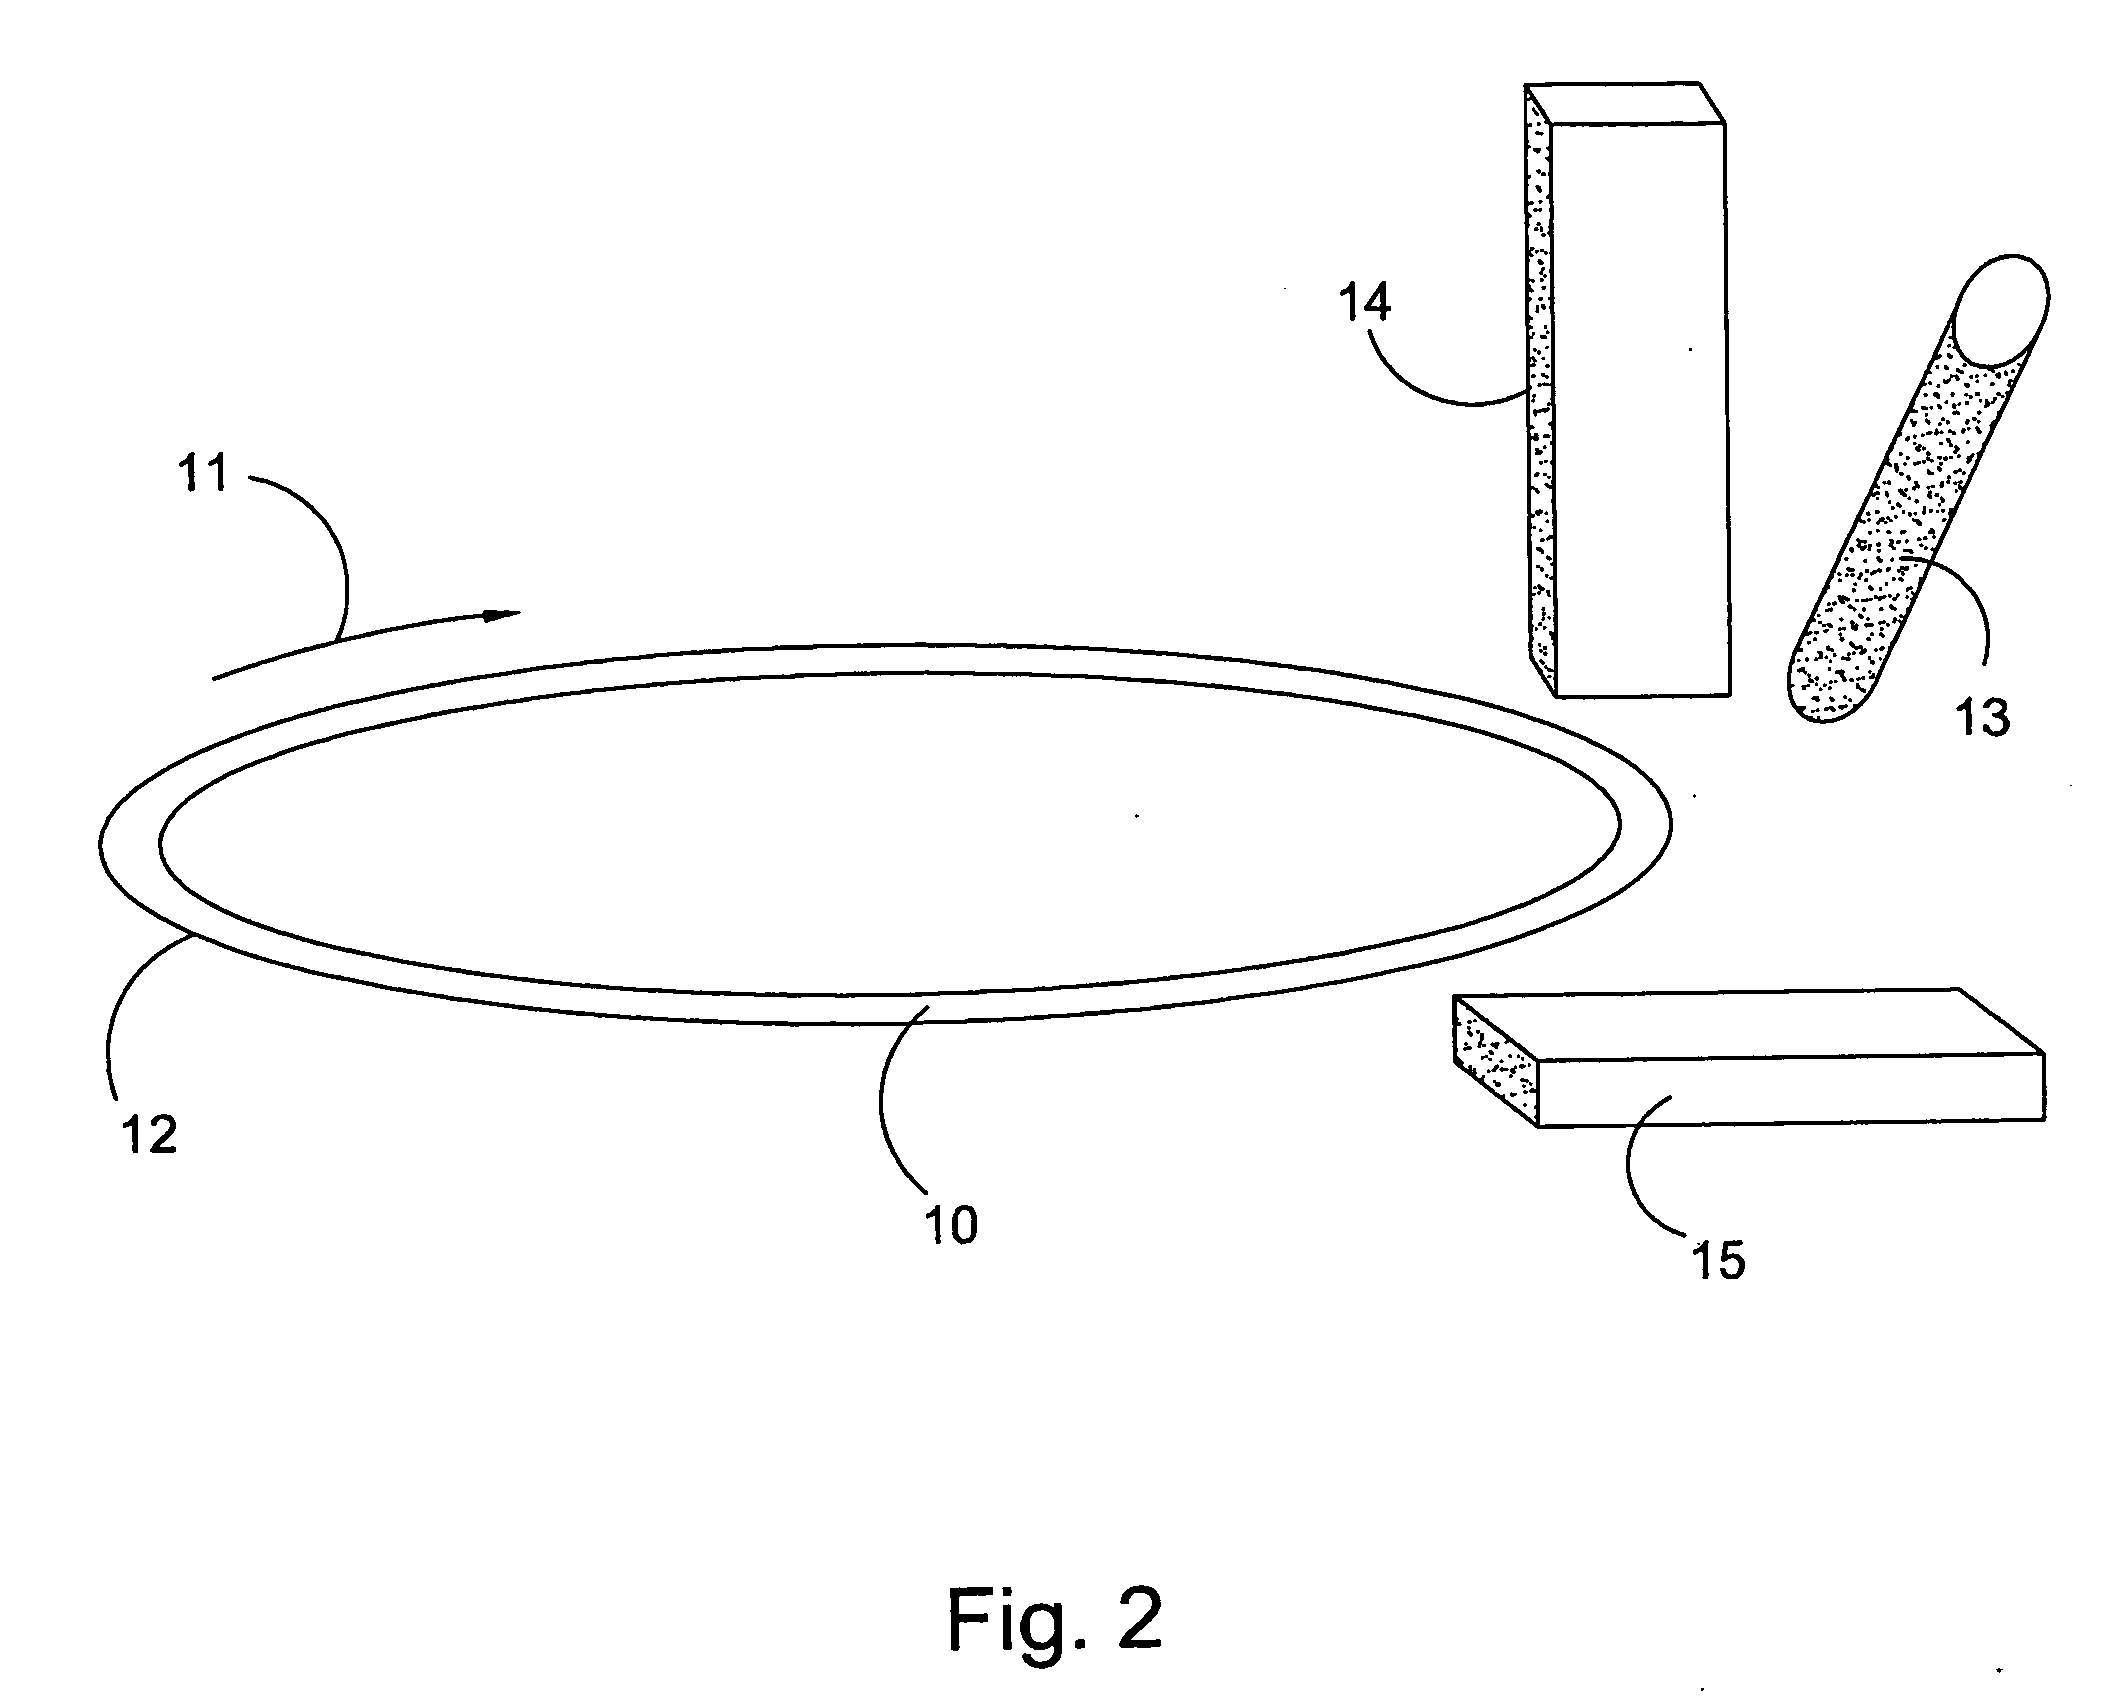 Method of detecting incomplete edge bead removal from a disk-like object